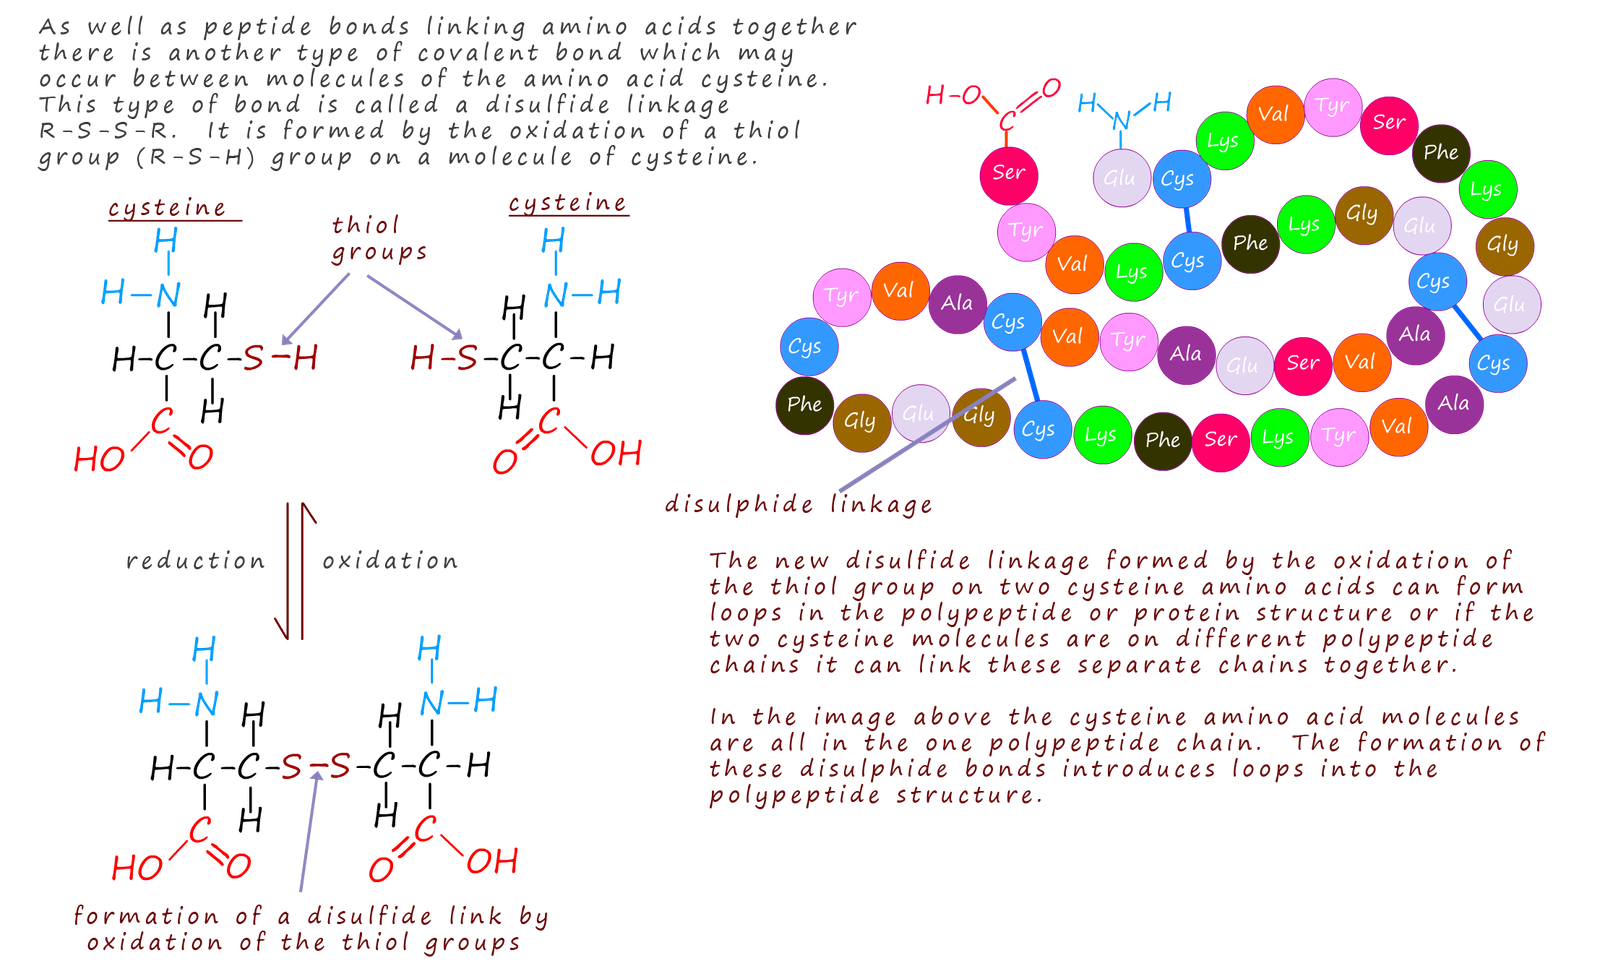 formation of disulfide links by the oxidation of thiols groups in the amino acid cysteine